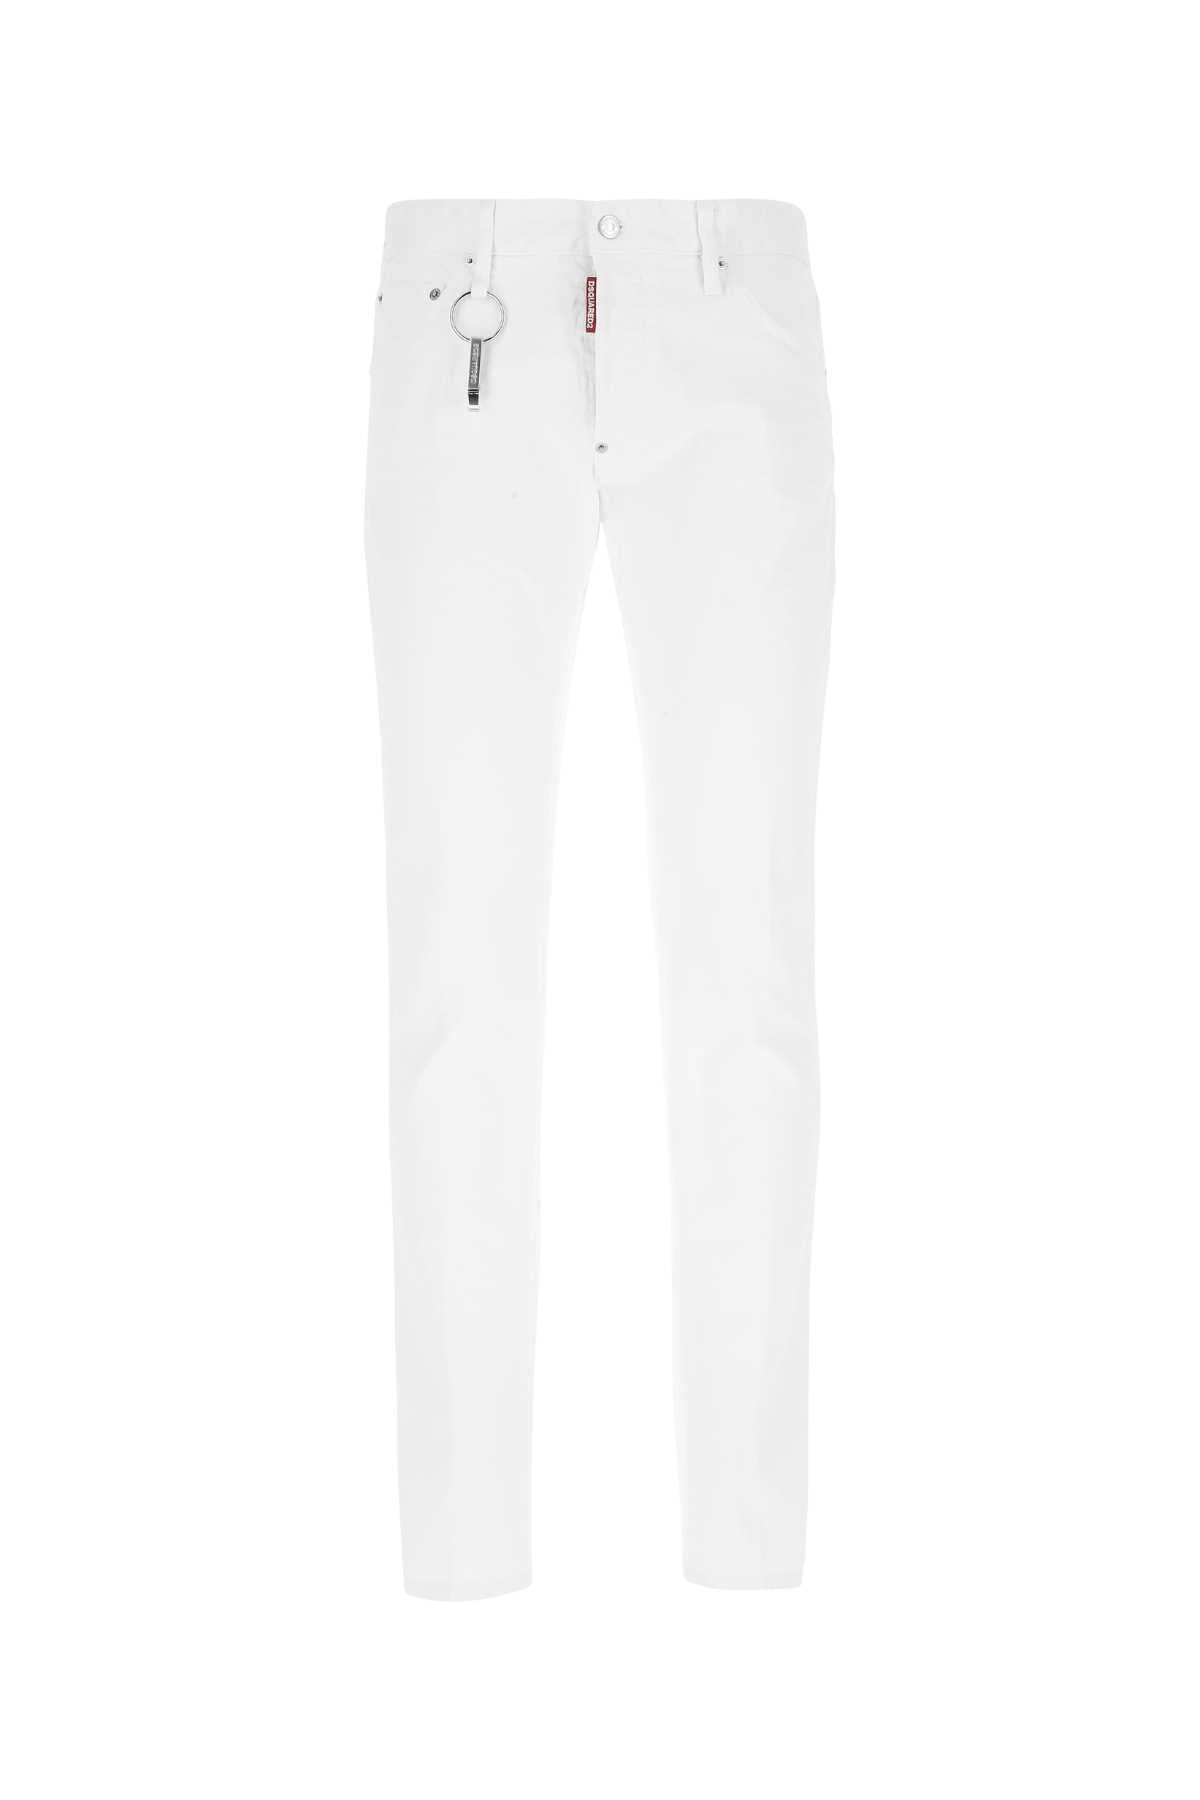 DSQUARED2 DSQUARED2 CHARM EMBELLISHED JEANS